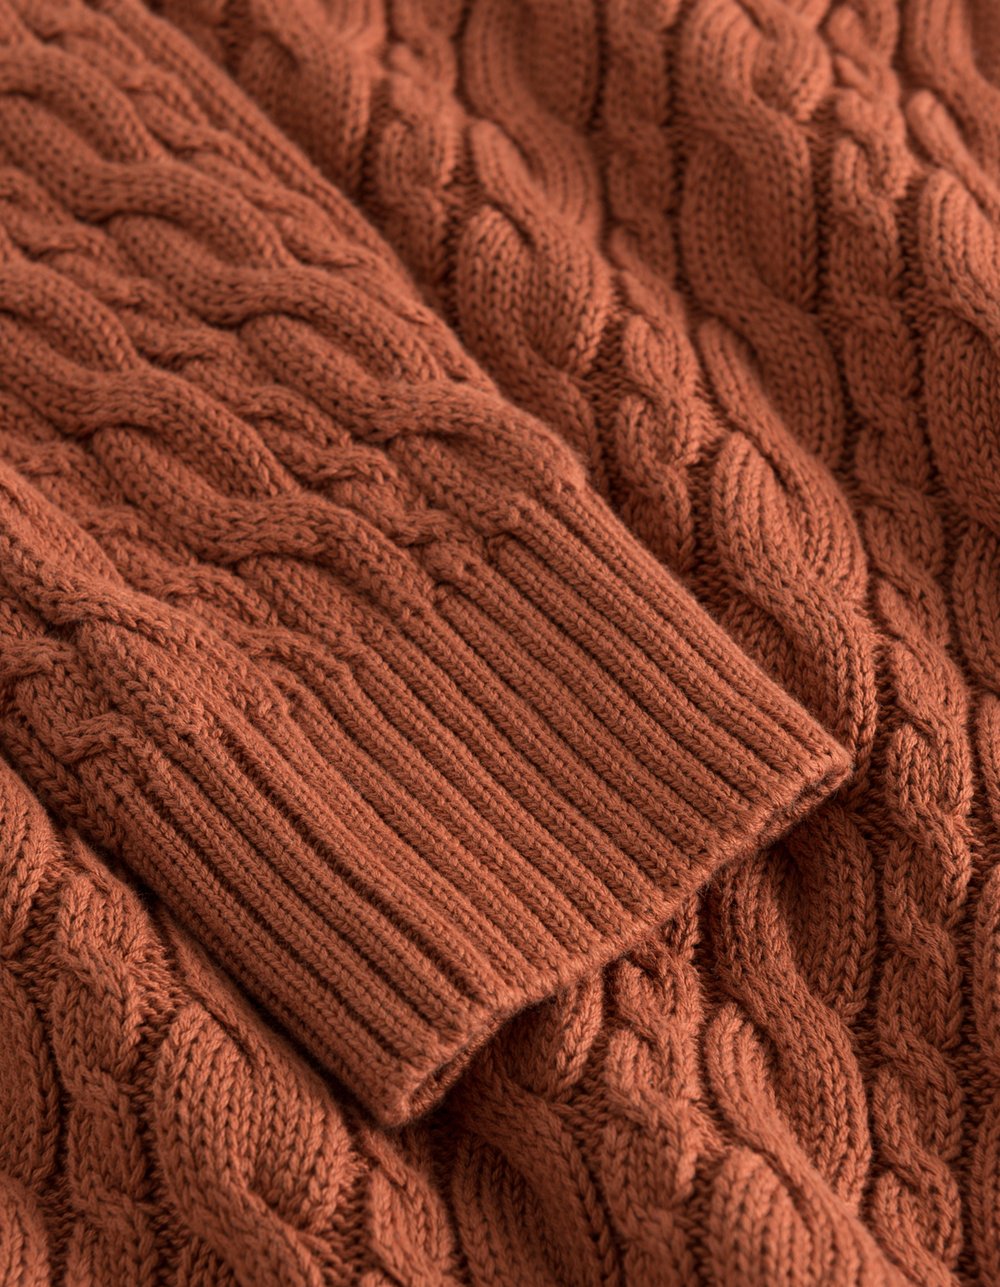 EMILIO CABLE KNIT - BOMBAY BROWN